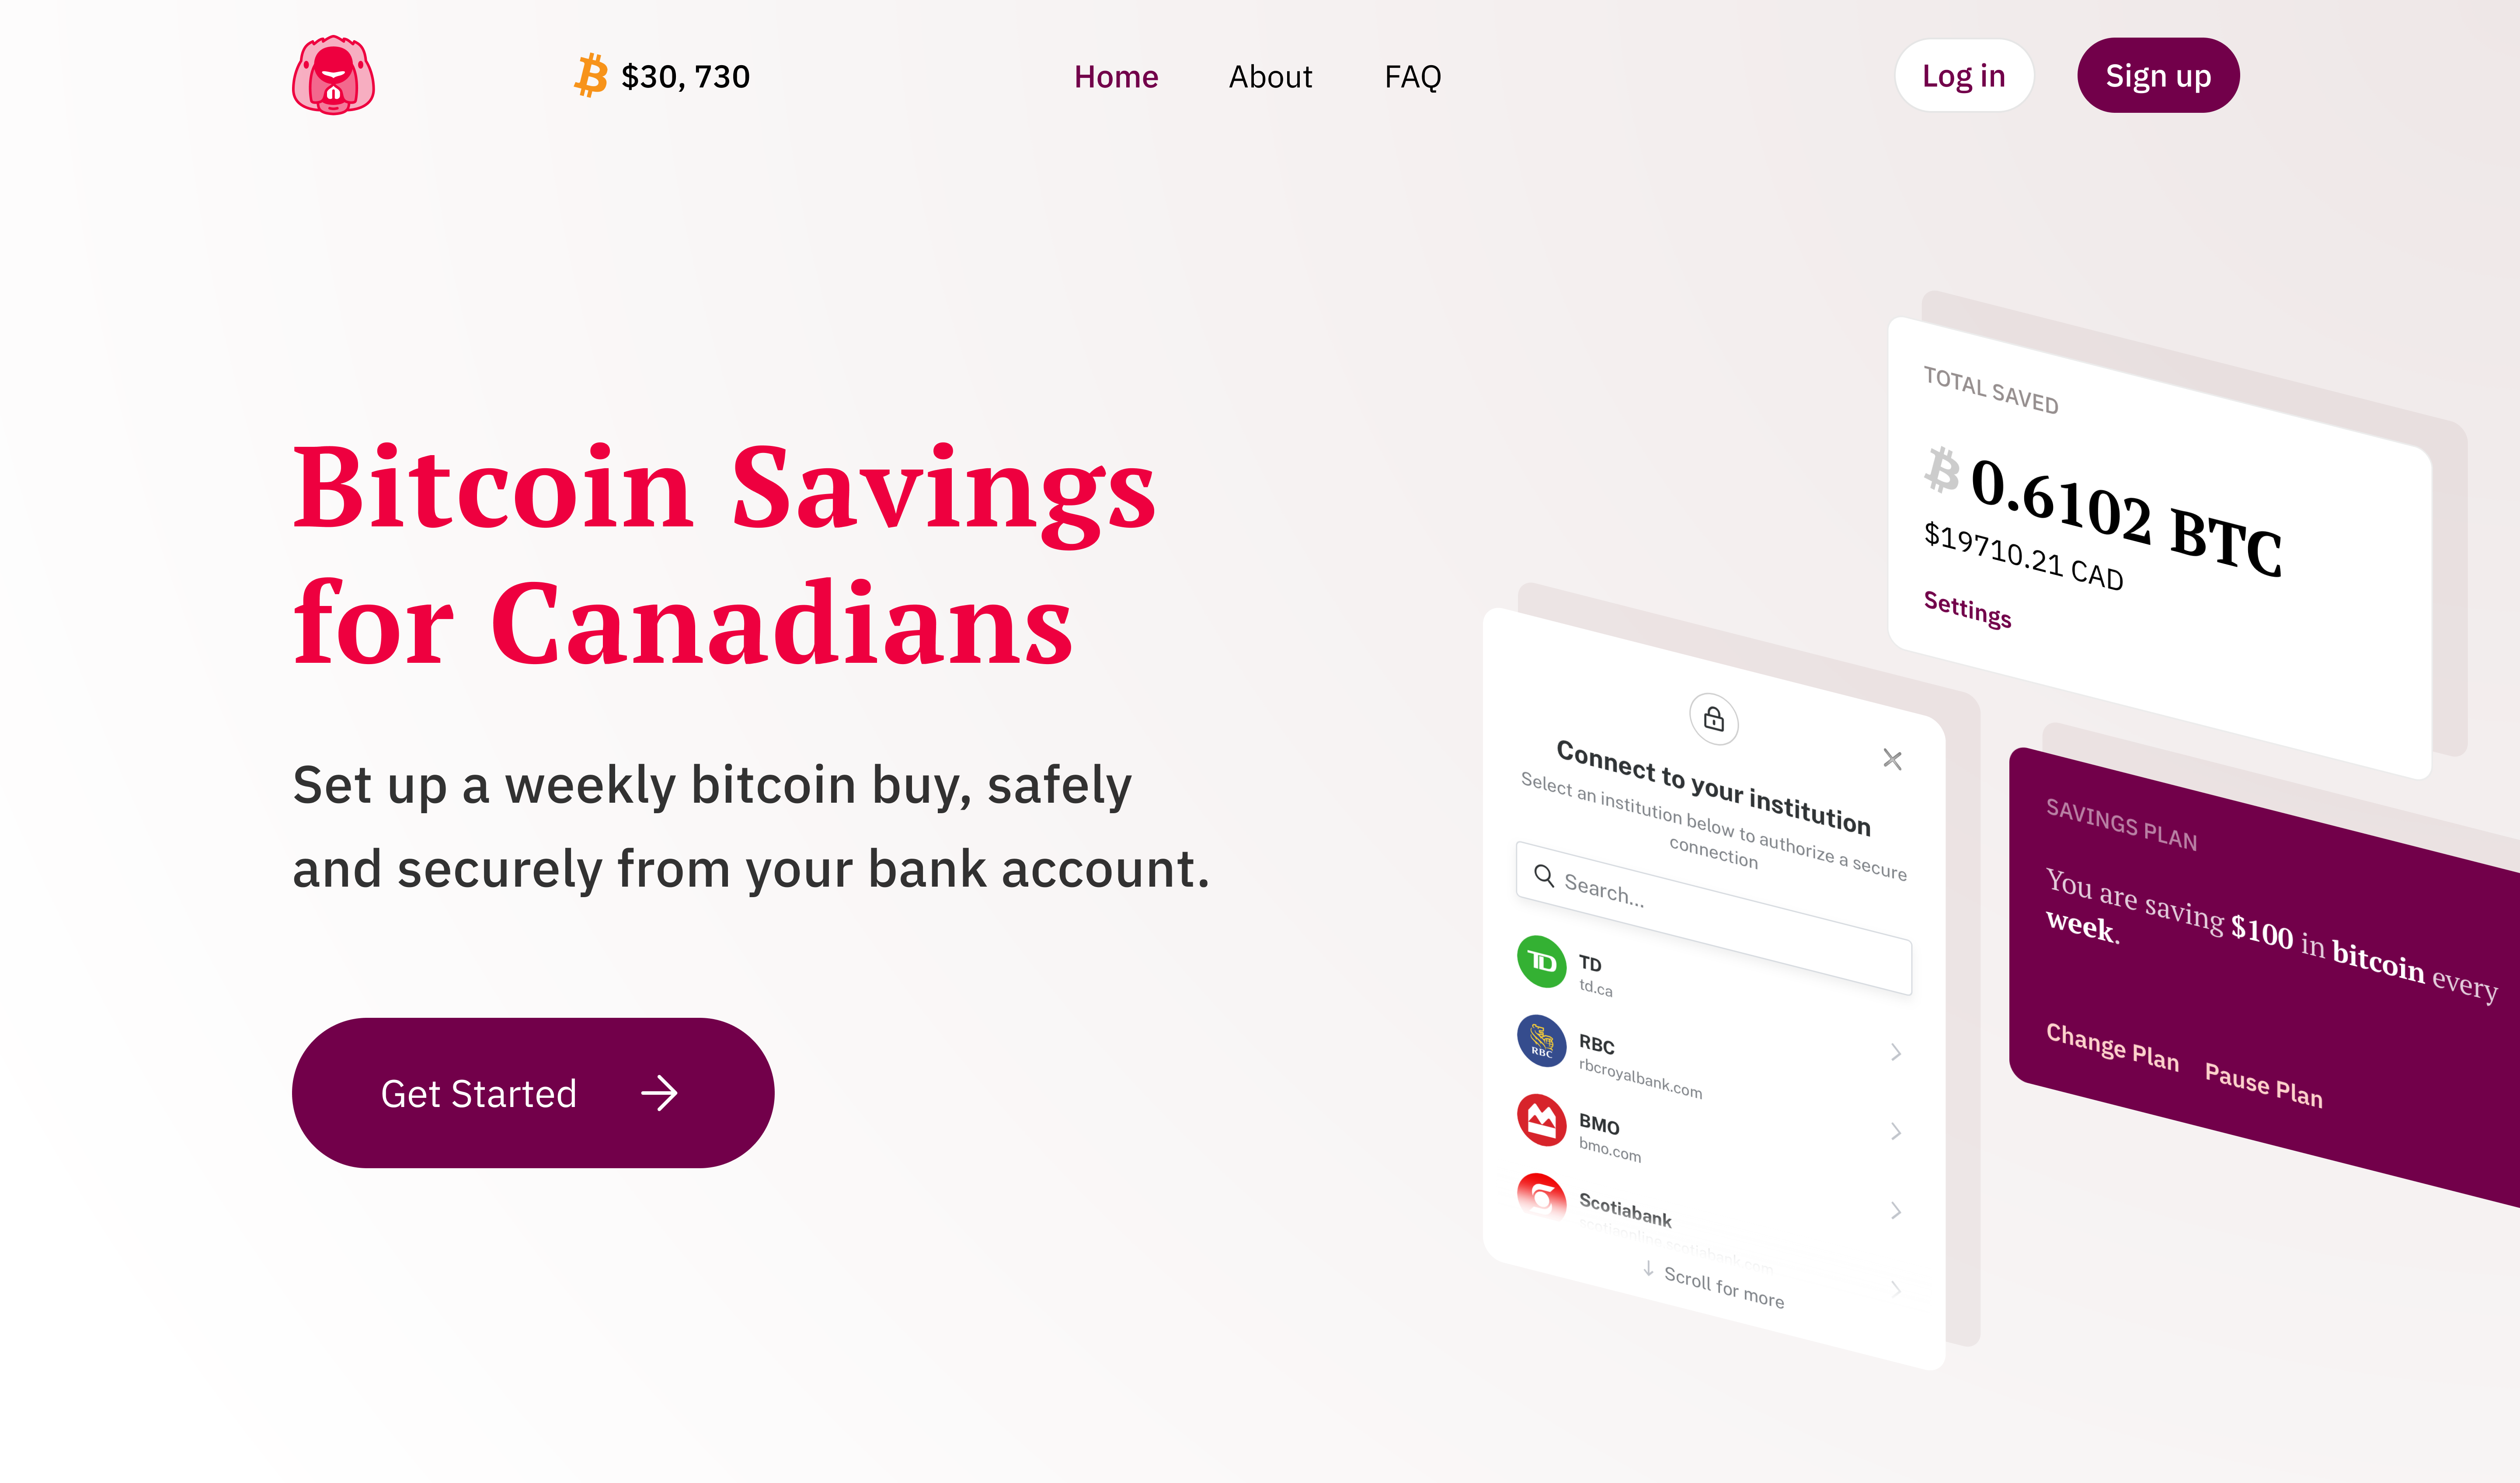 Beaver Bitcoin enables Canadians to set up an automated weekly bitcoin purchase, directly from their bank account.